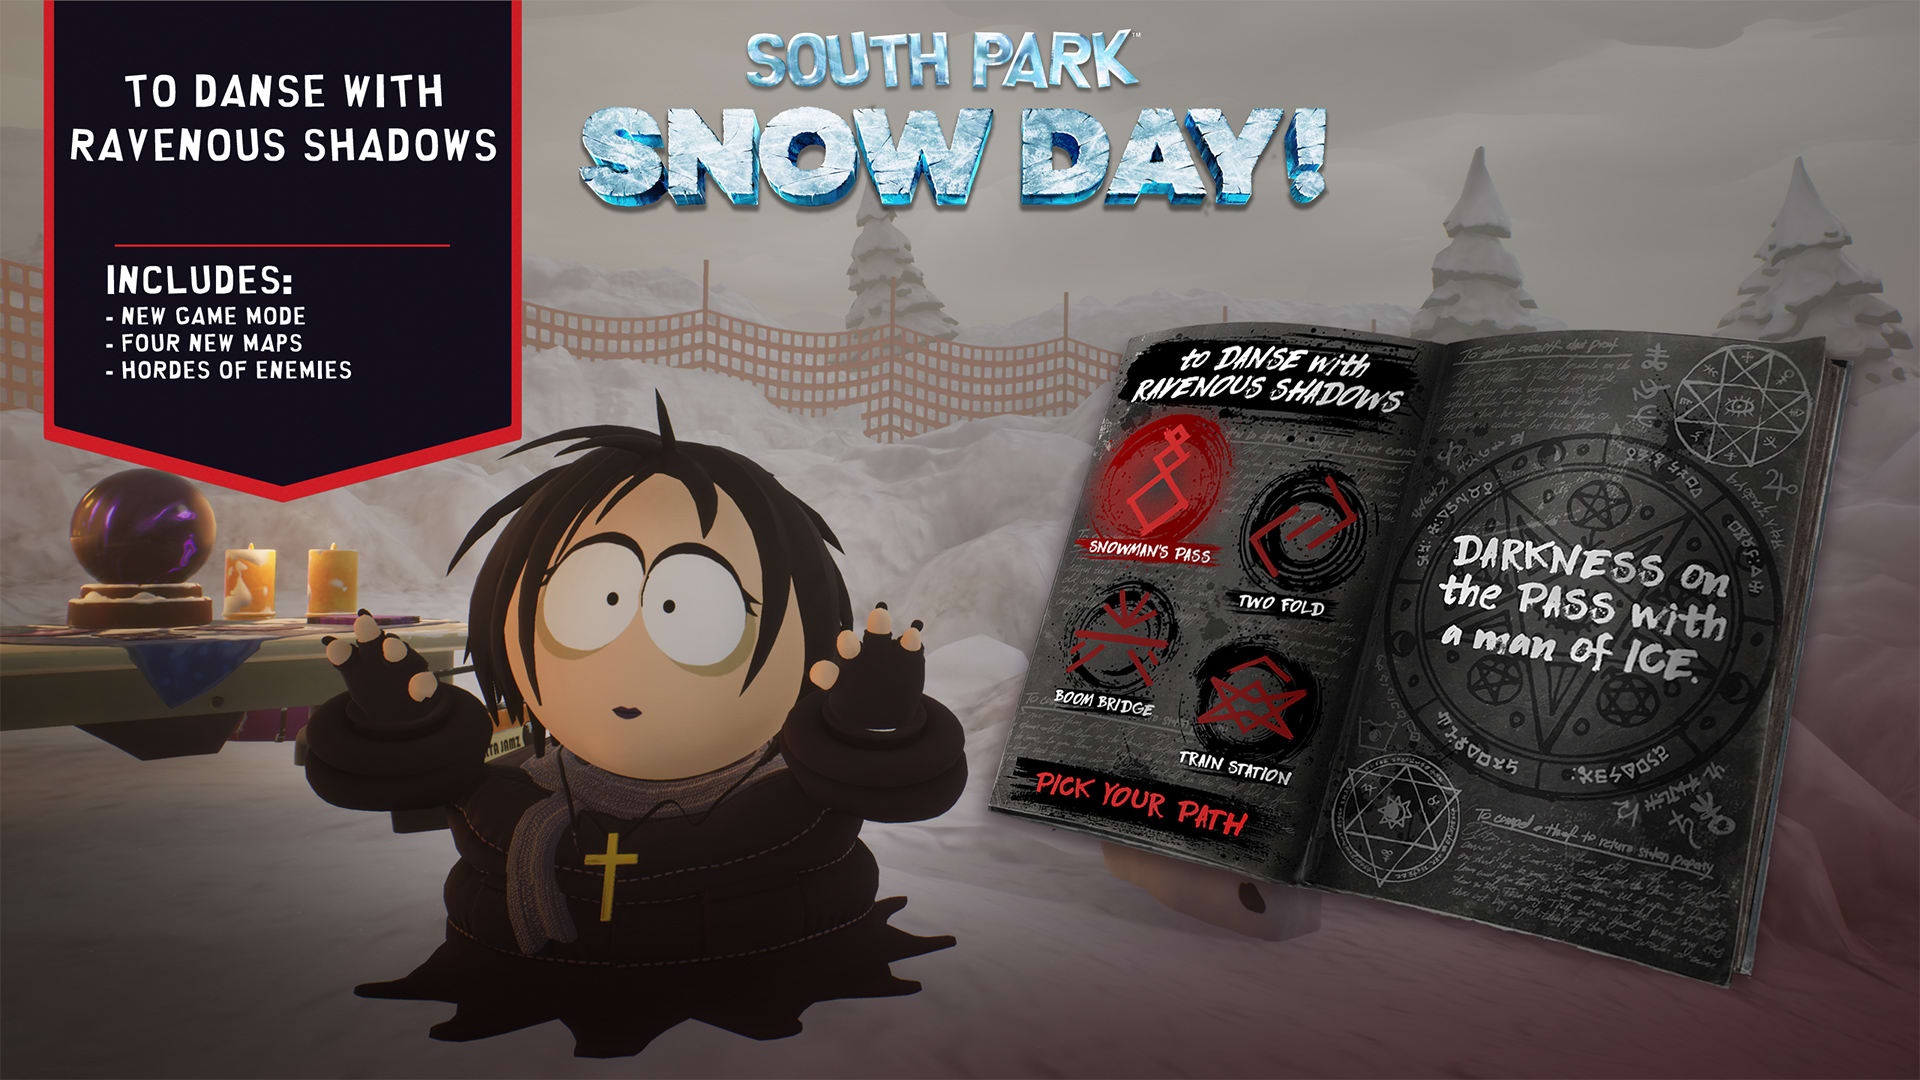 SOUTH PARK: SNOW DAY! To Danse with Ravenous Shadows 1